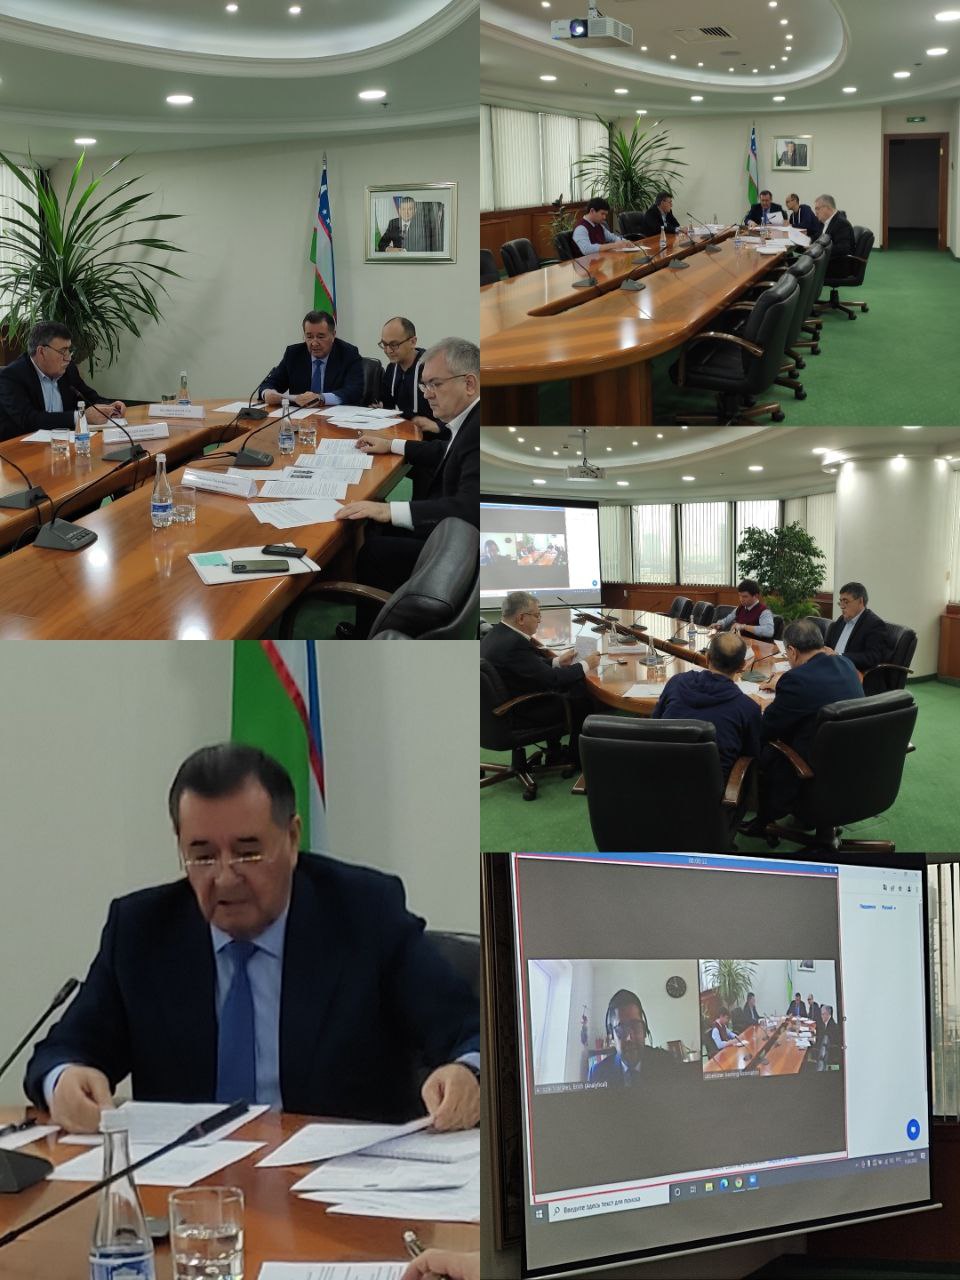 On March 15, 2022, an online meeting was organized at the Association of Banks of Uzbekistan.